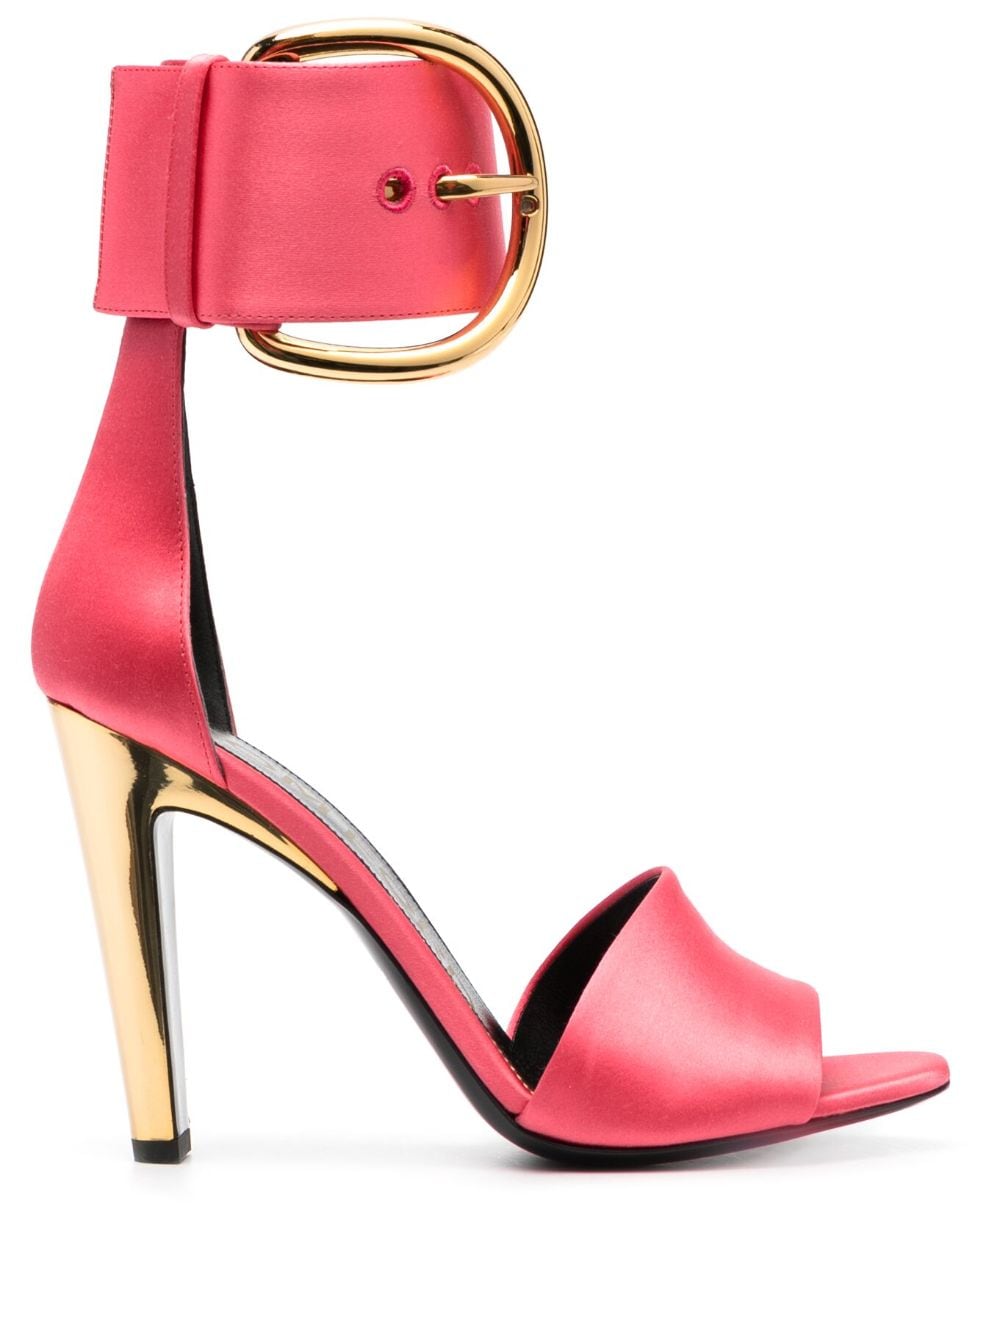 Tom Ford Buckled Satin 105mm Sandals In Rosa